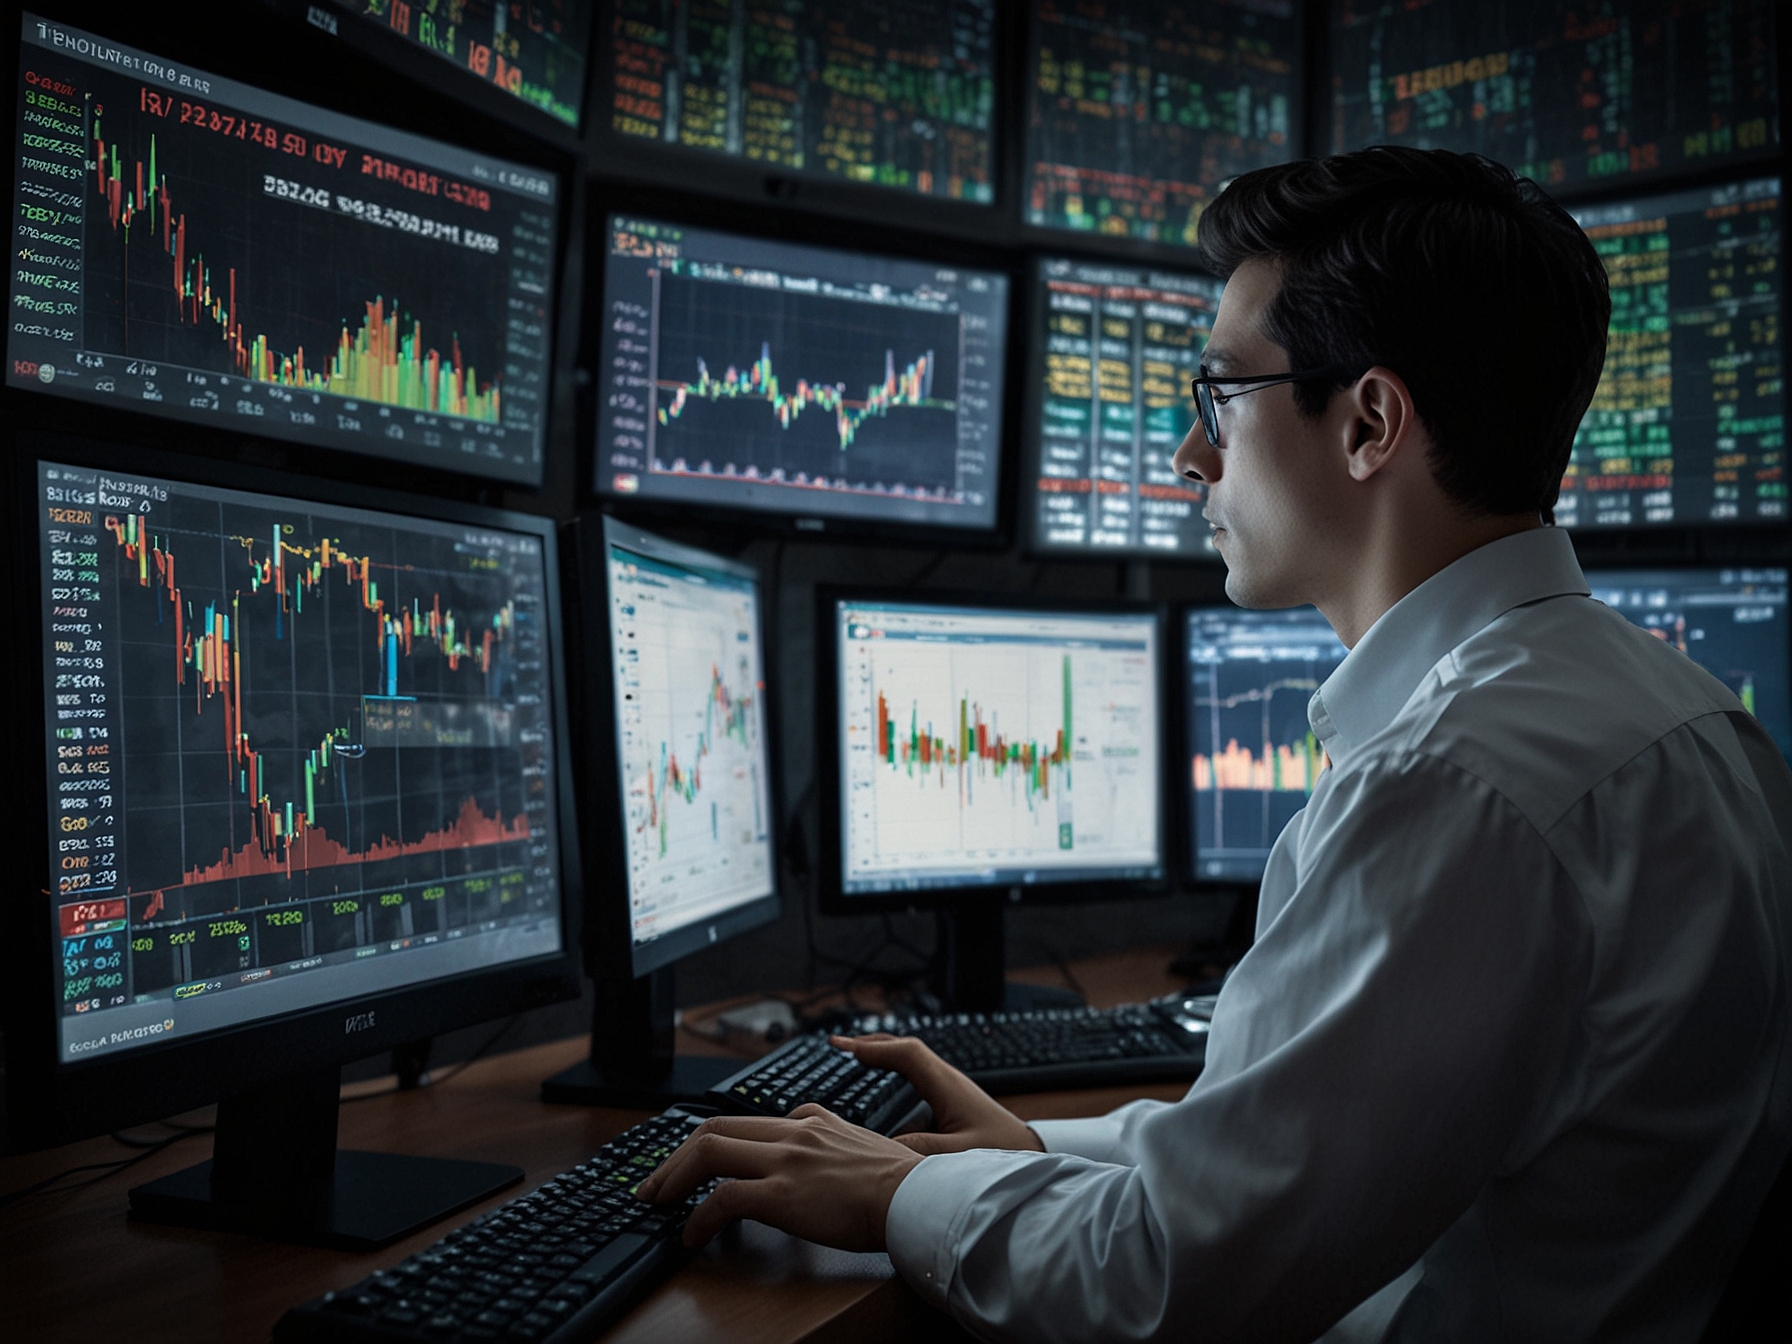 Investors monitoring stock market data on screens, depicting the enthusiastic response to Exide Industries' positive market performance and strategic advancements.